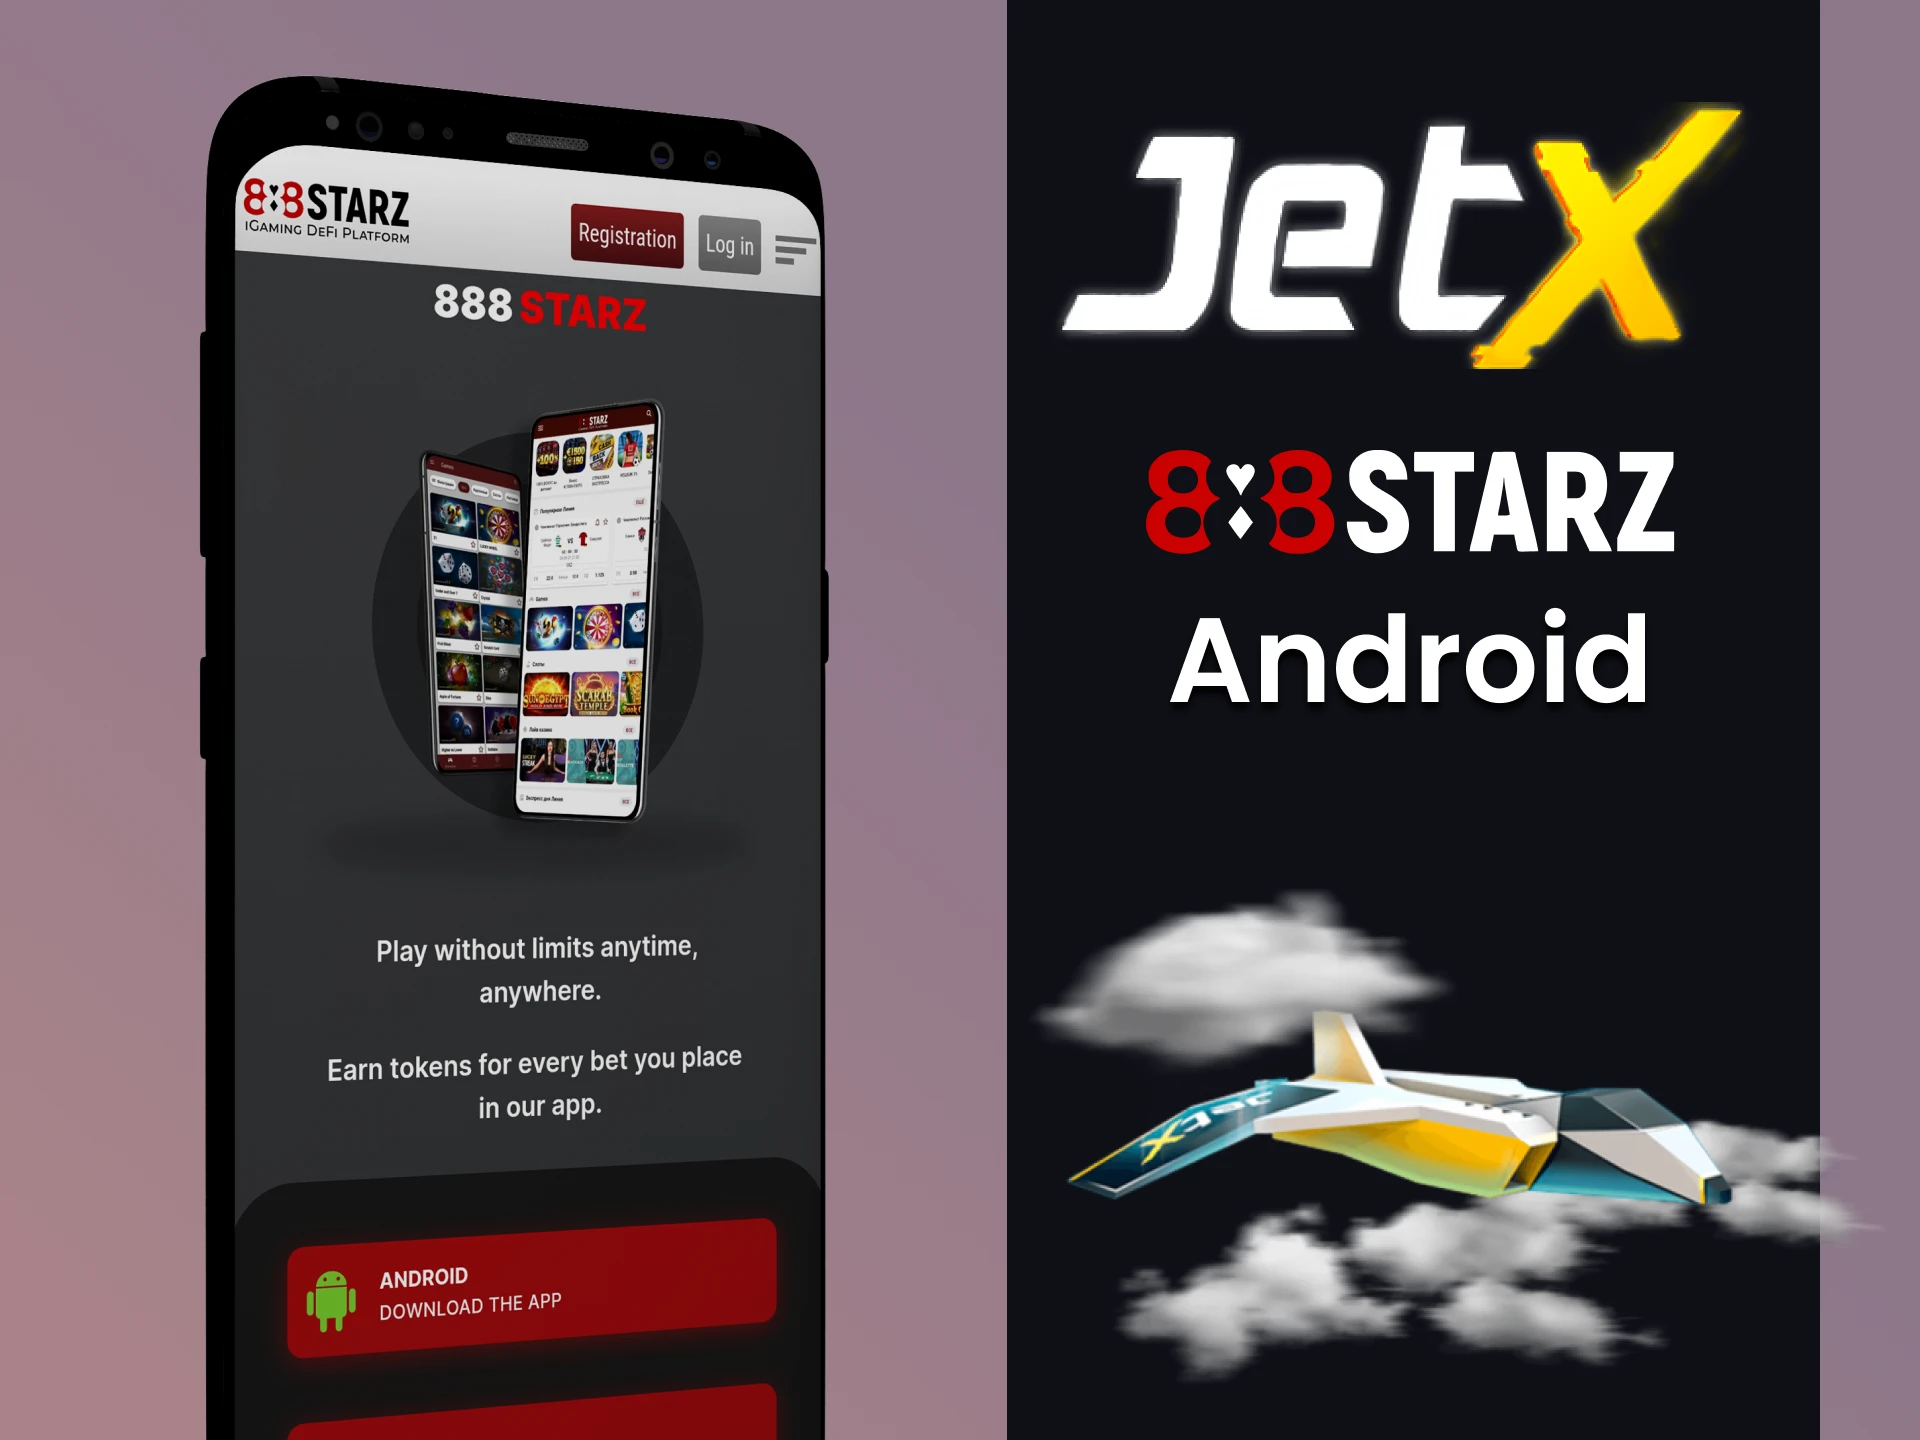 Install the 888starz app on Android to play JetX.